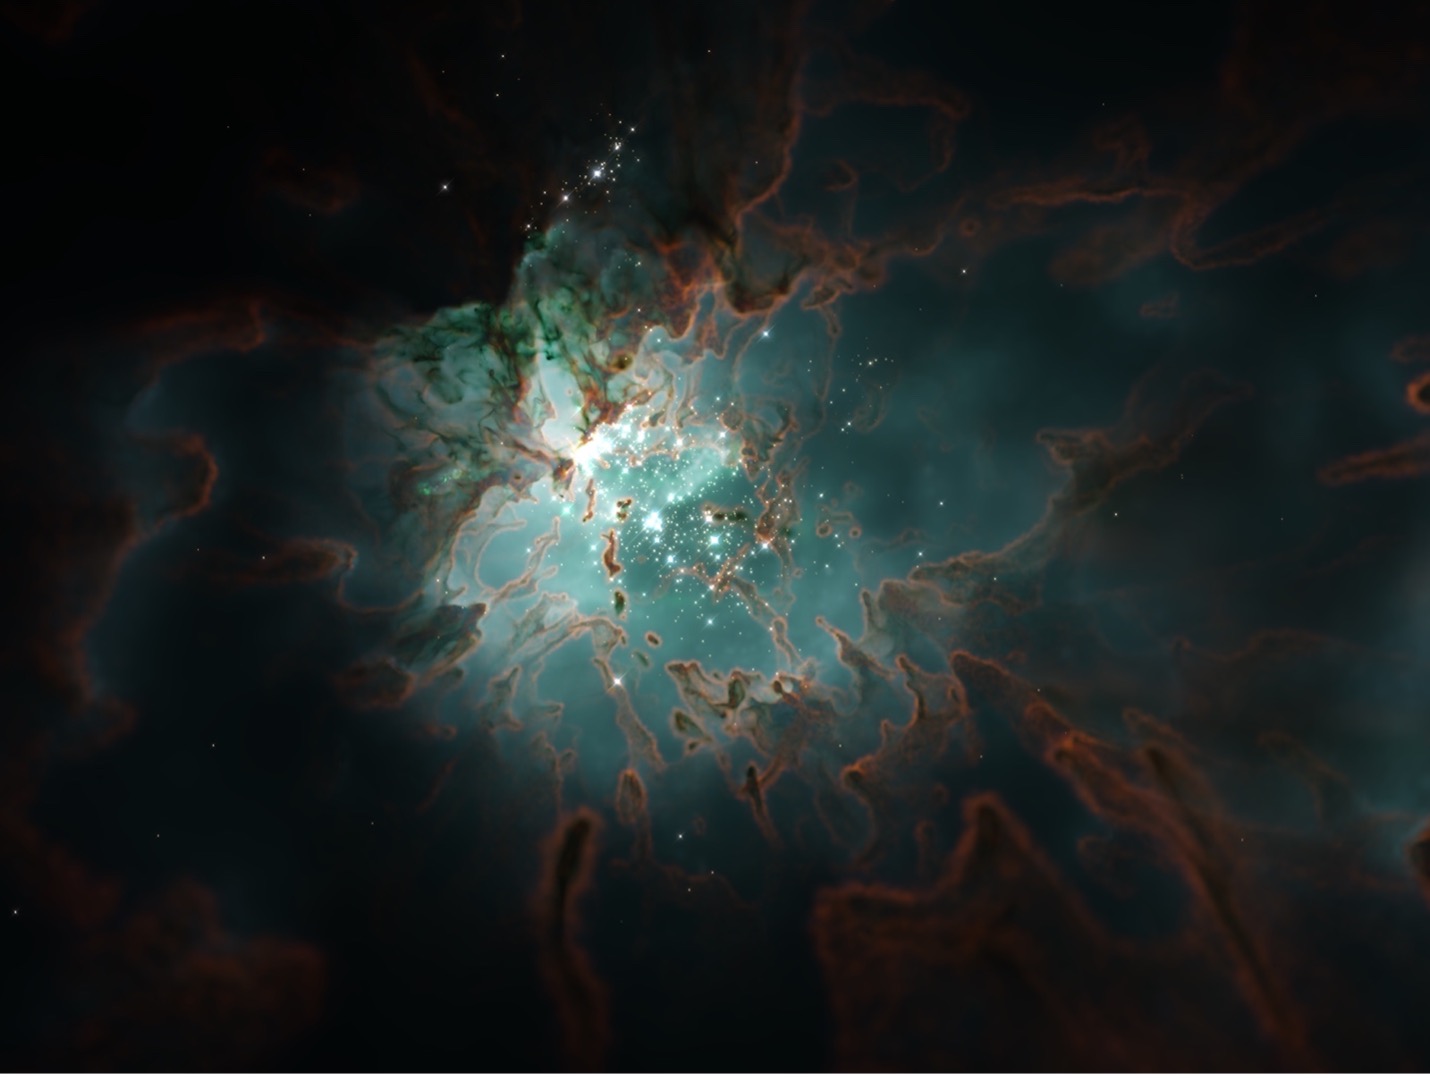 Mock narrowband observation of a simulated star-forming region where massive stars destroy their parent cloud. Credit: STARFORGE